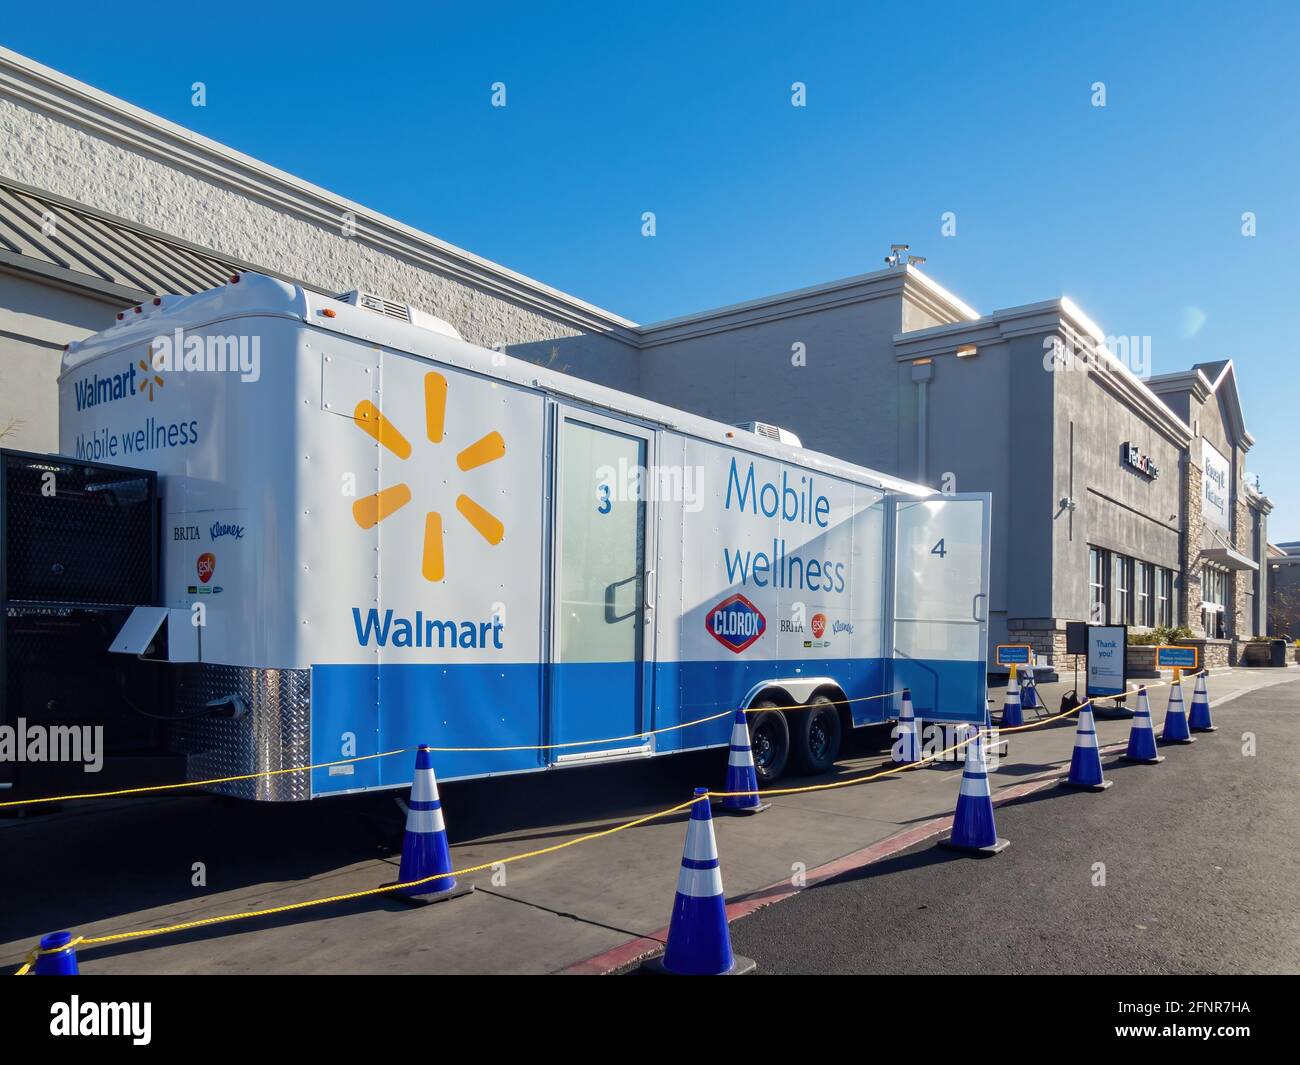 Las Vegas, FEB 25, 2021 - Walmart Mobile wellness truck in front of the grocery store Stock Photo